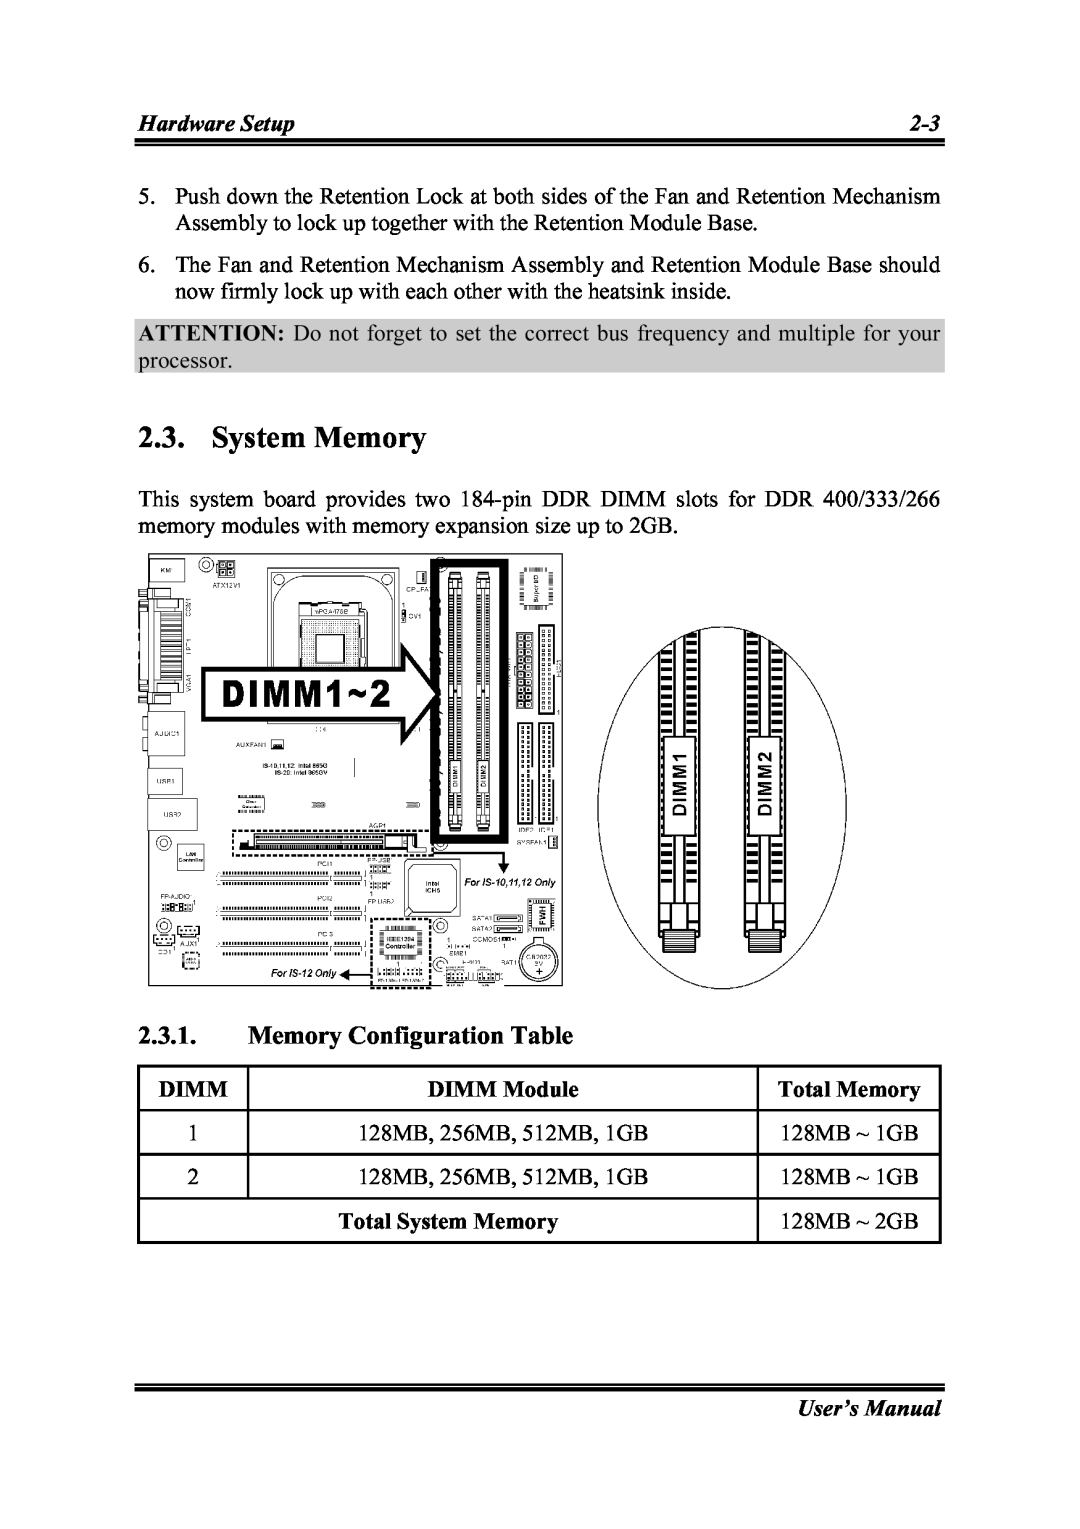 Abit IS-11, IS-12, IS-20, IS-10 user manual System Memory, Memory Configuration Table 